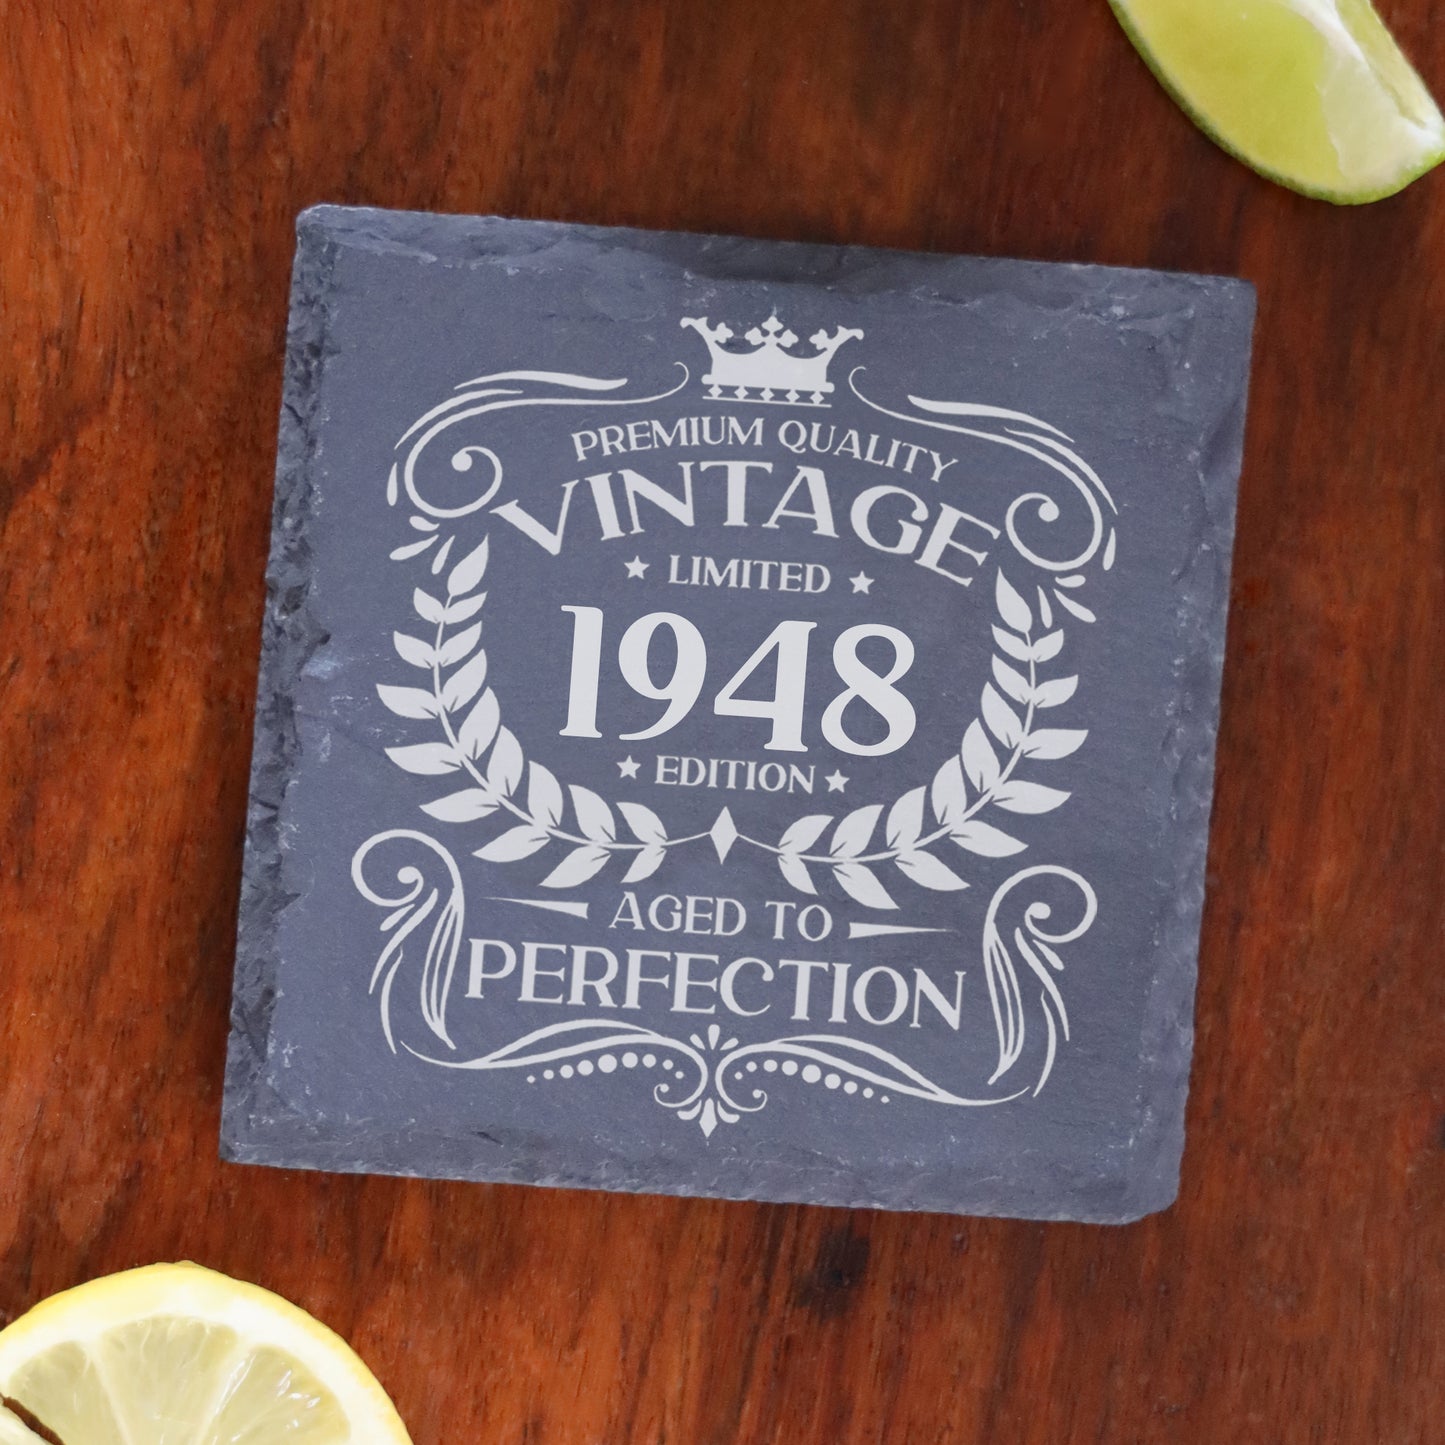 Vintage 1948 75th Birthday Engraved Gin Glass Gift  - Always Looking Good - Square Coaster Only  